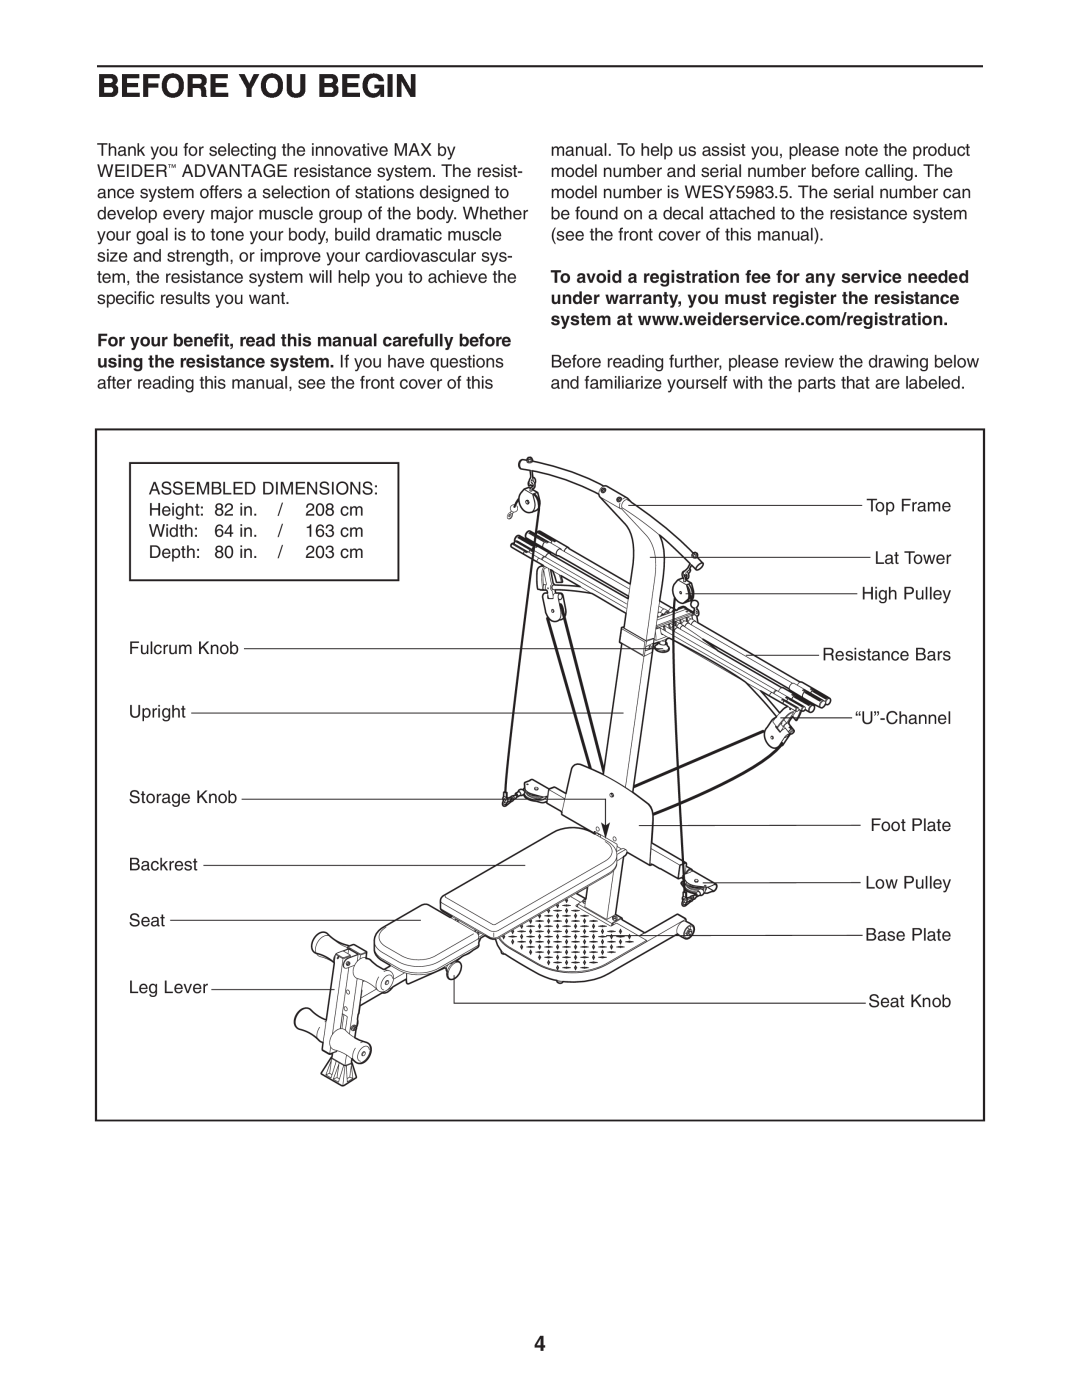 Weider WESY5983.5 user manual Before You Begin 